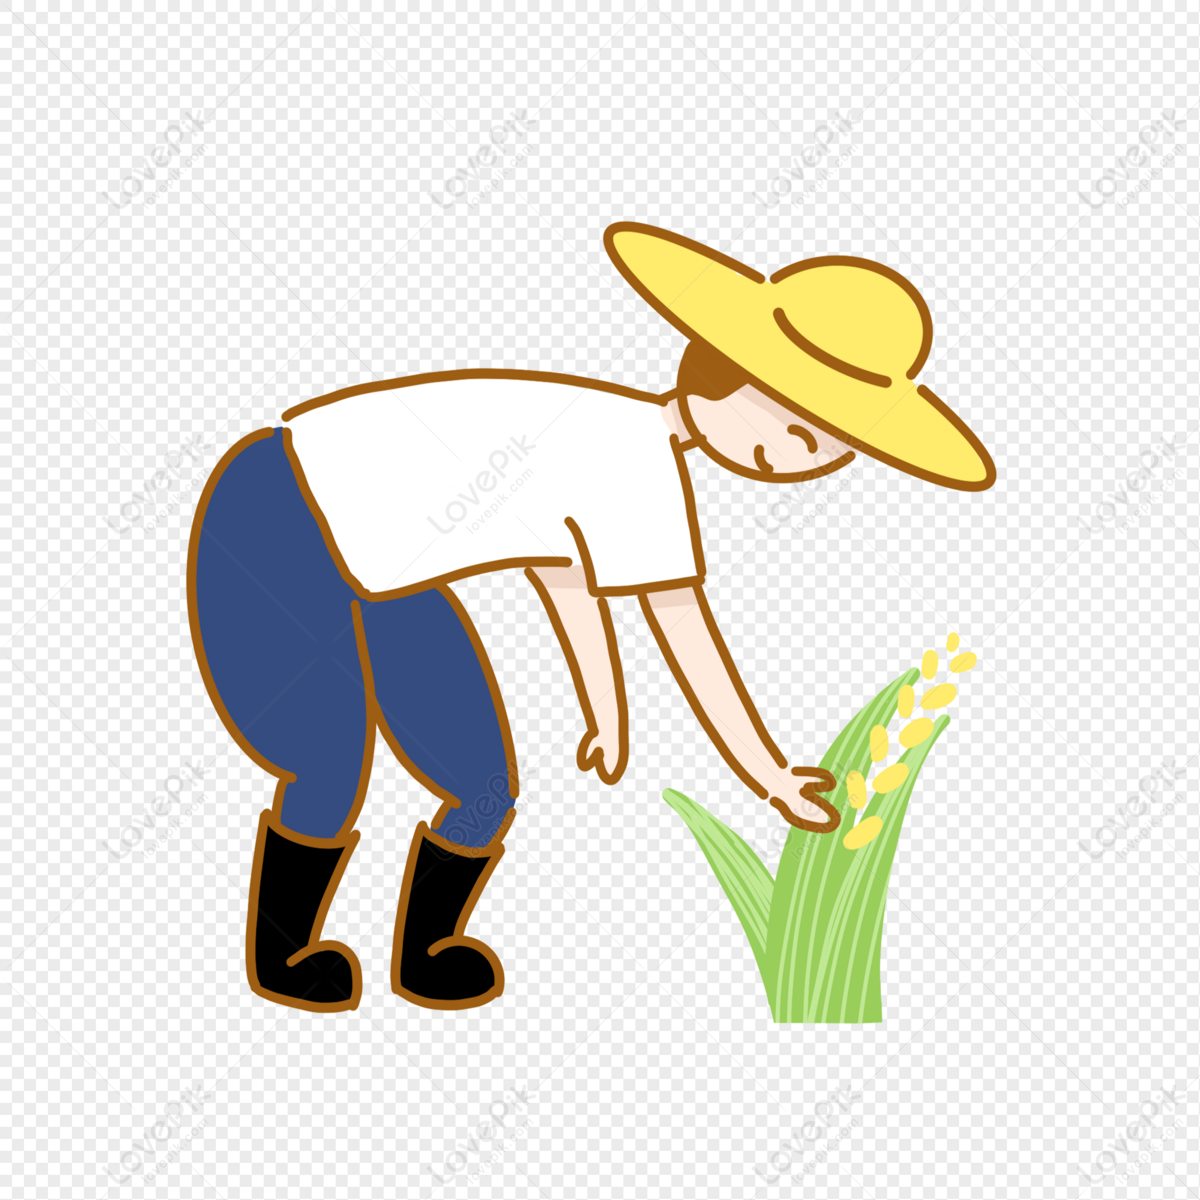 Harvest PNG White Transparent And Clipart Image For Free Download ...